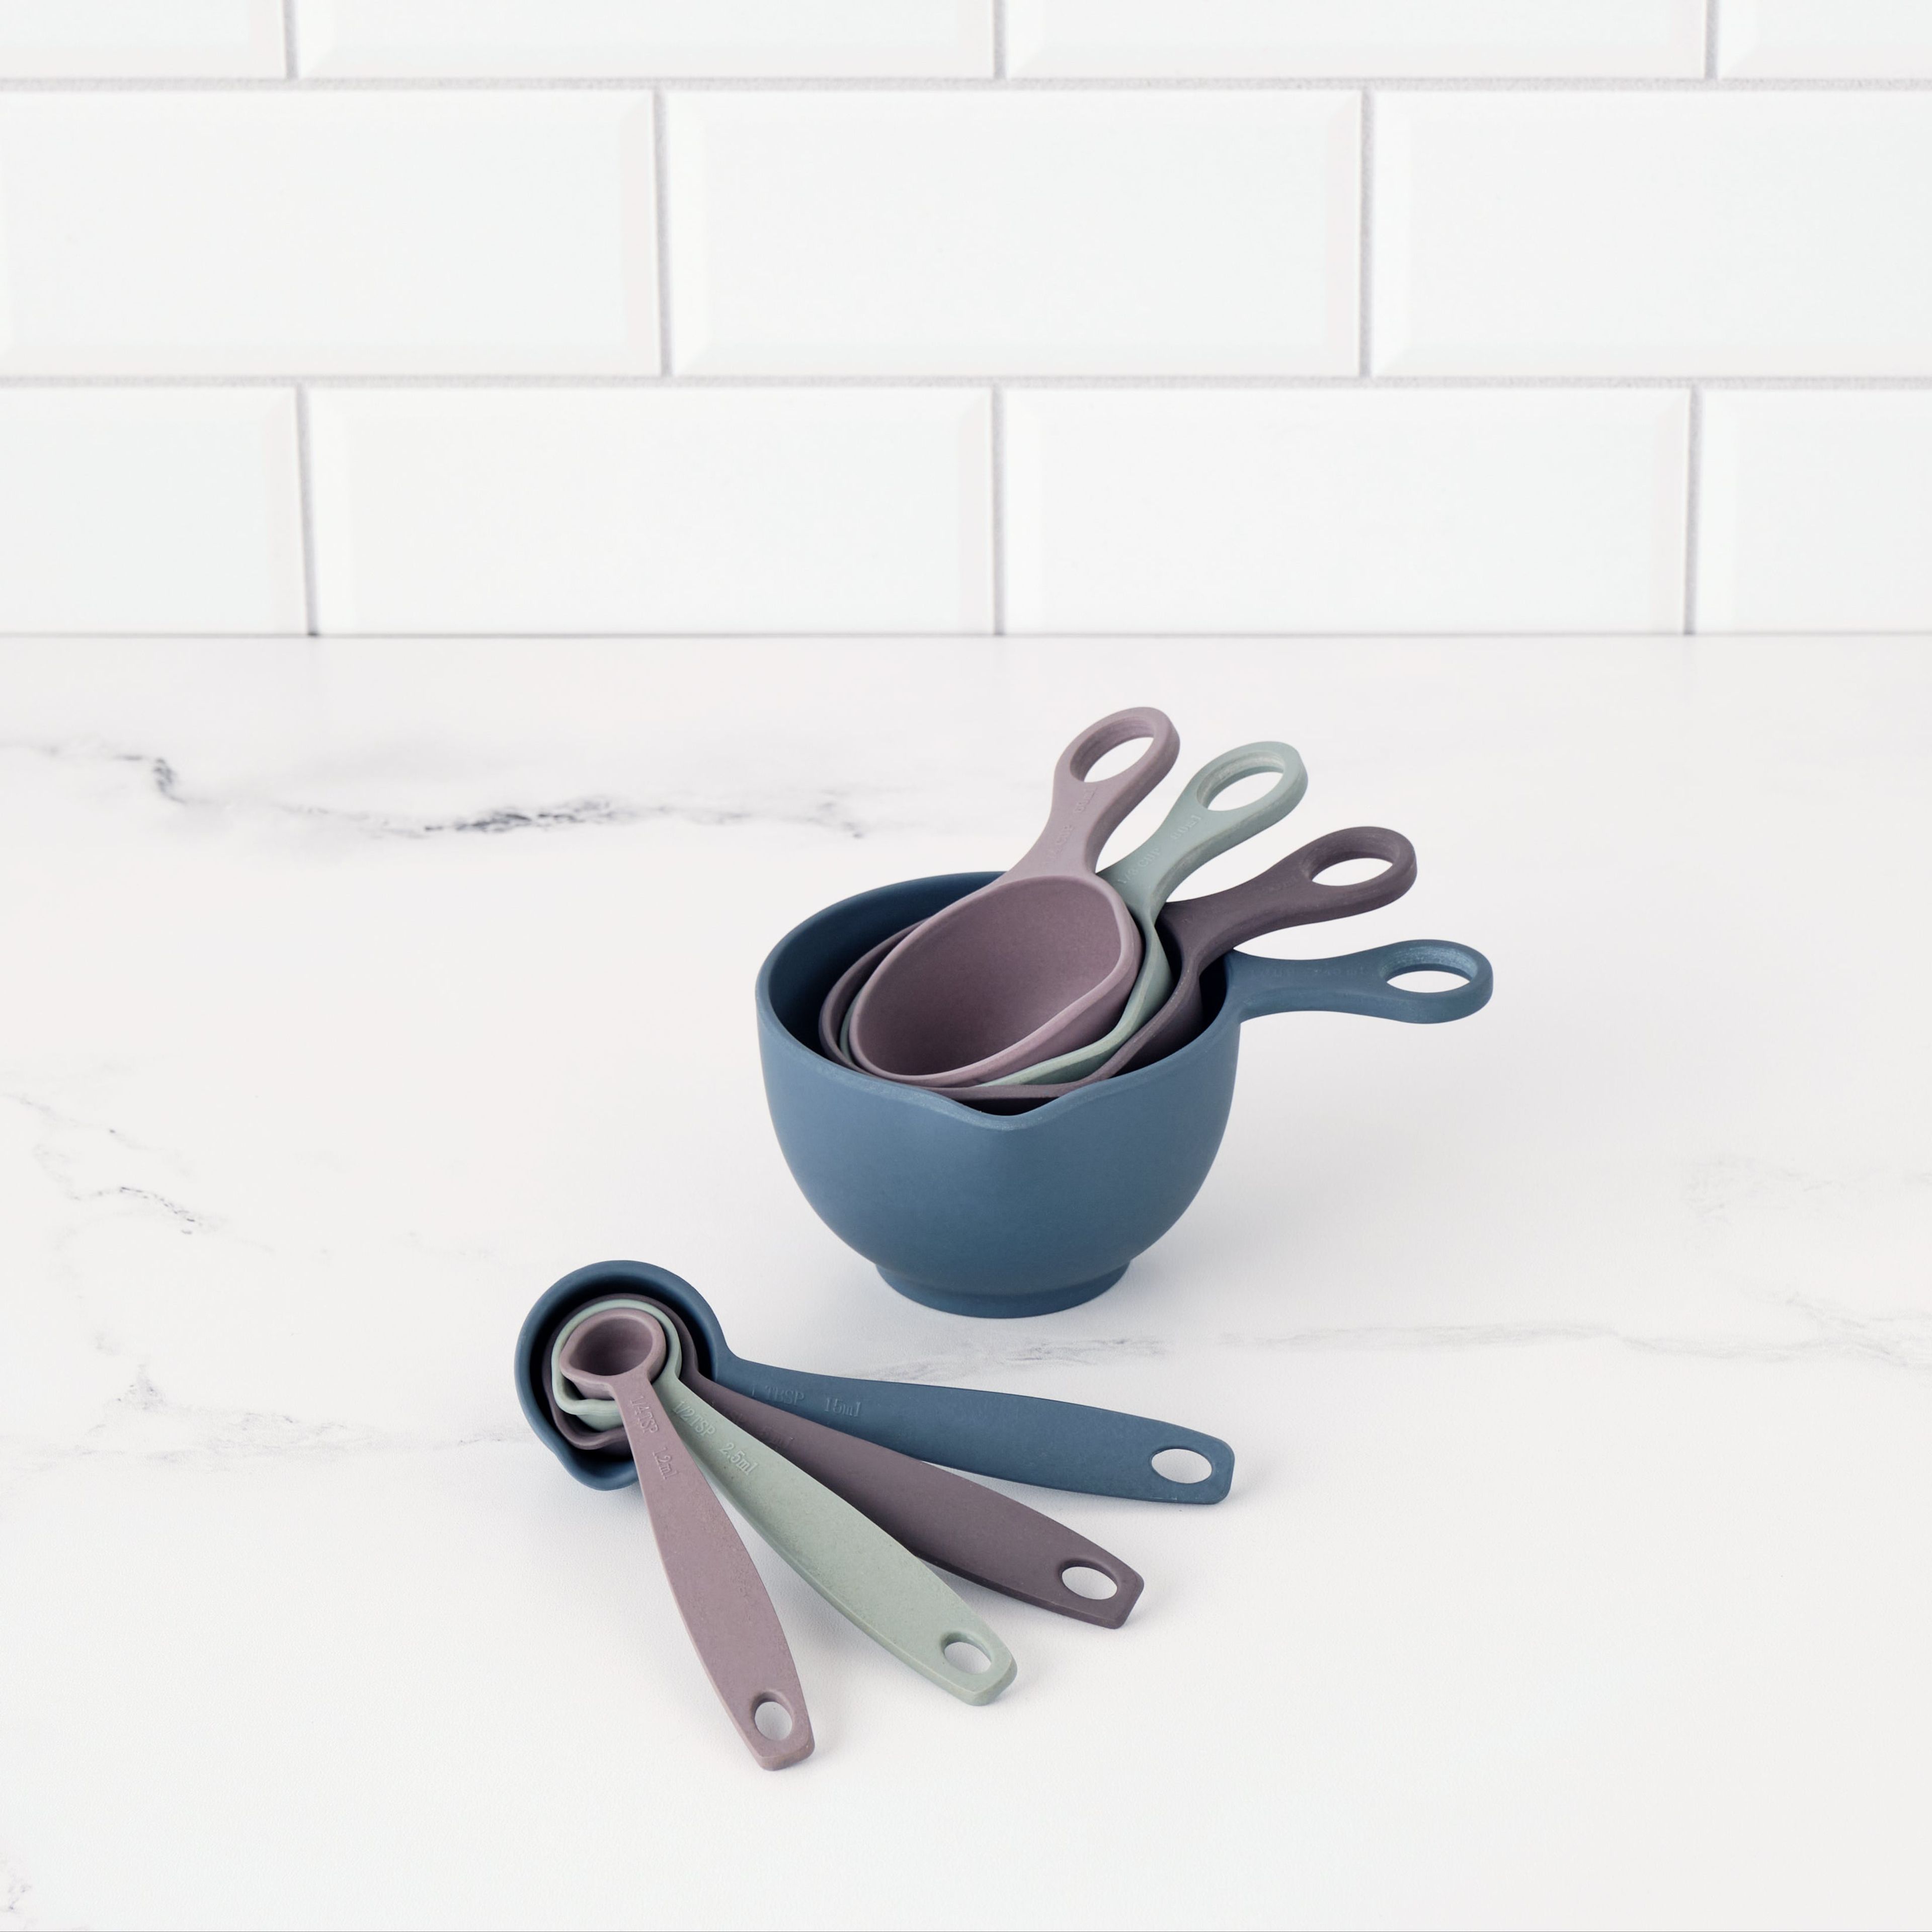 Measuring Cup and Spoon Set